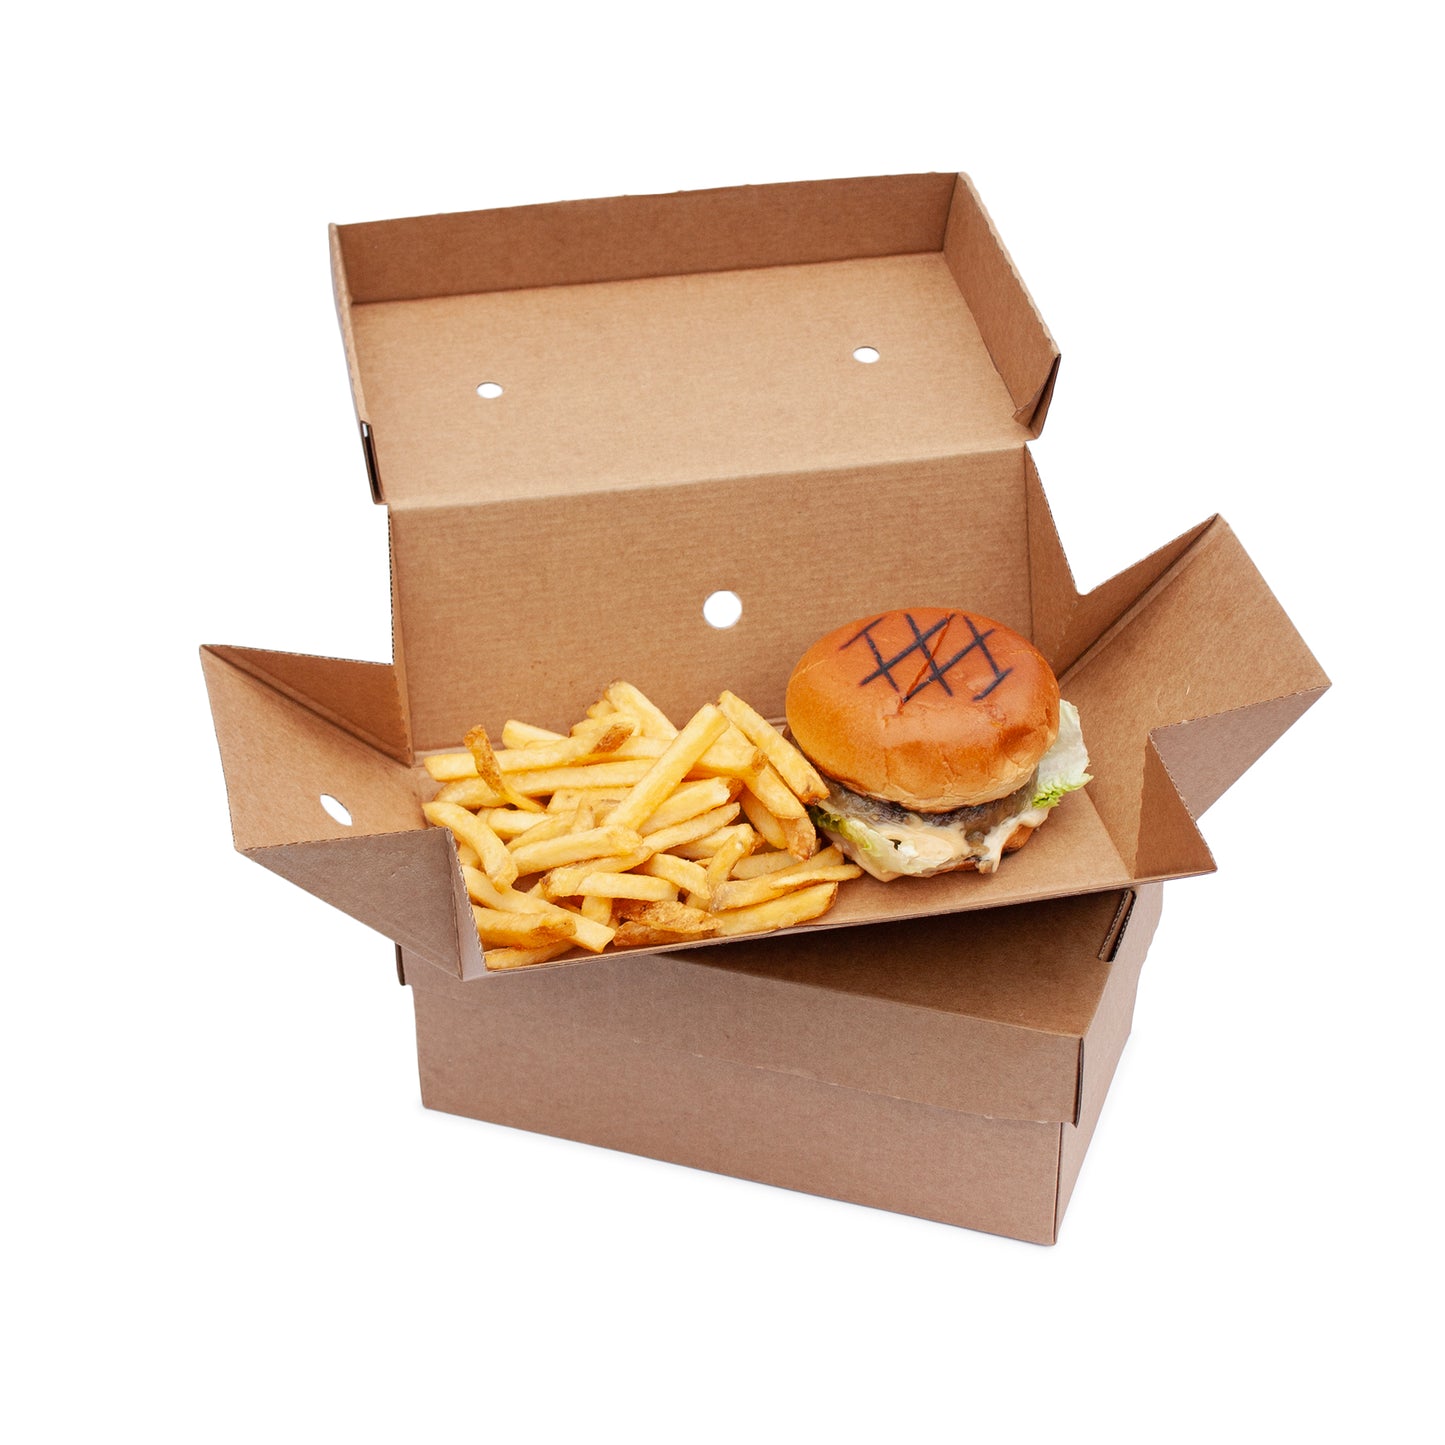 Burger delivery packaging Large Premium Burger box 100 units, 244mm X 122mm X 102mm (Corrugated)